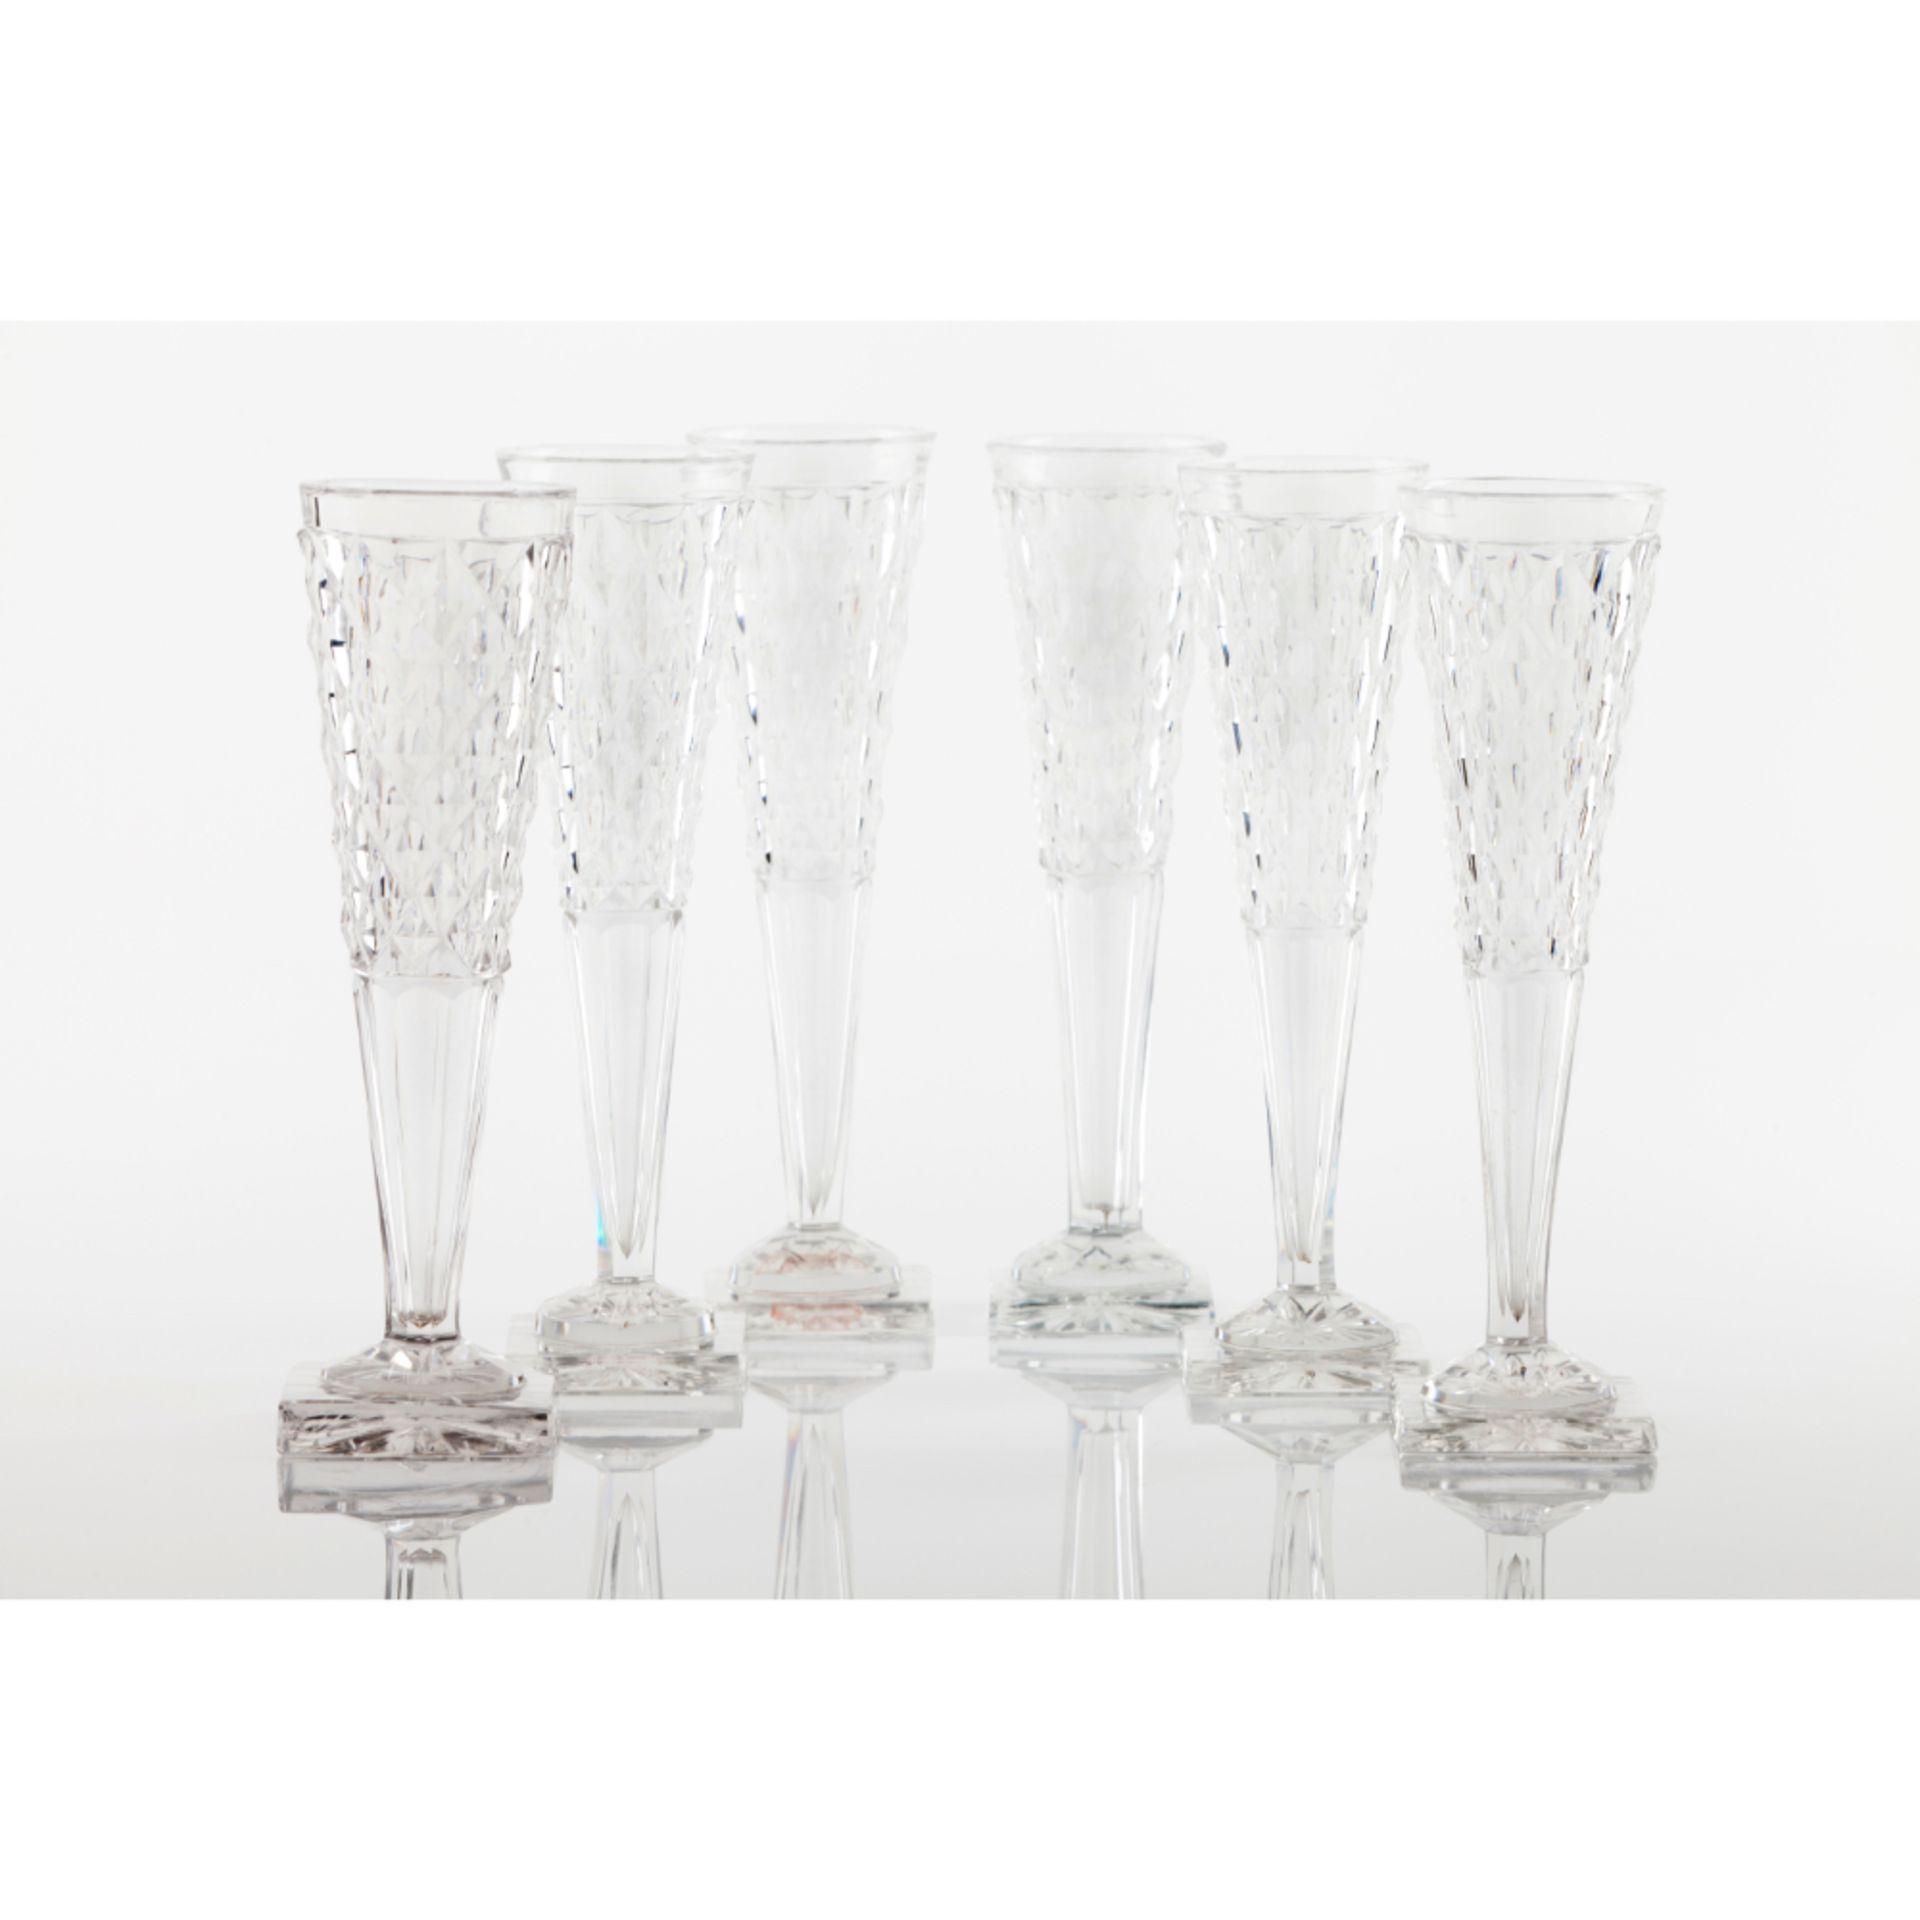 A set of 6 cut crystal champagne flutes